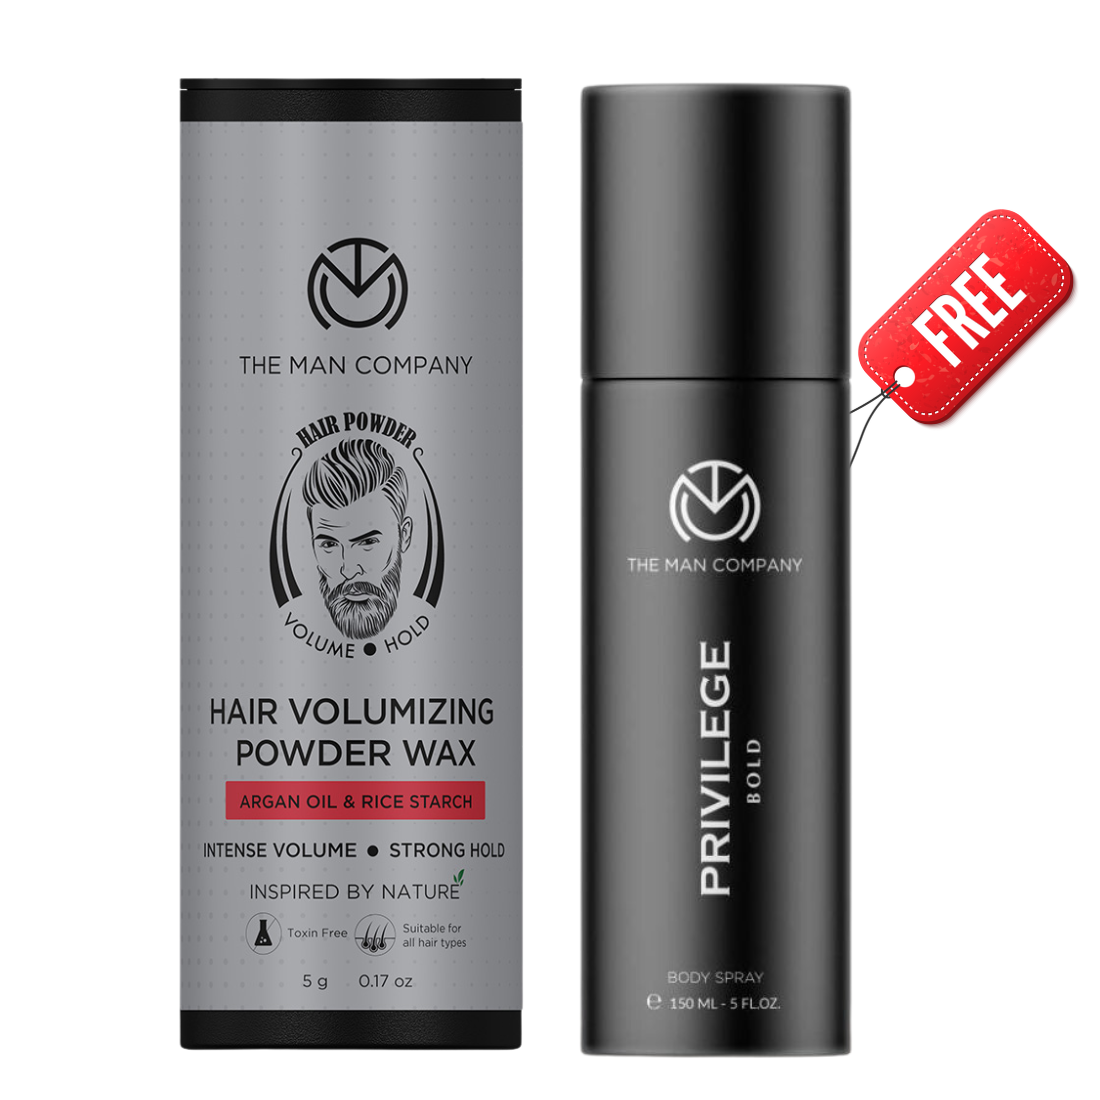 Buy ManUp Hair Volumizing Powder Wax For Men  Strong Hold With Matte  Finish Hair Styling  All Natural Hair Styling Powder  For All Hair types   10gm Online at Low